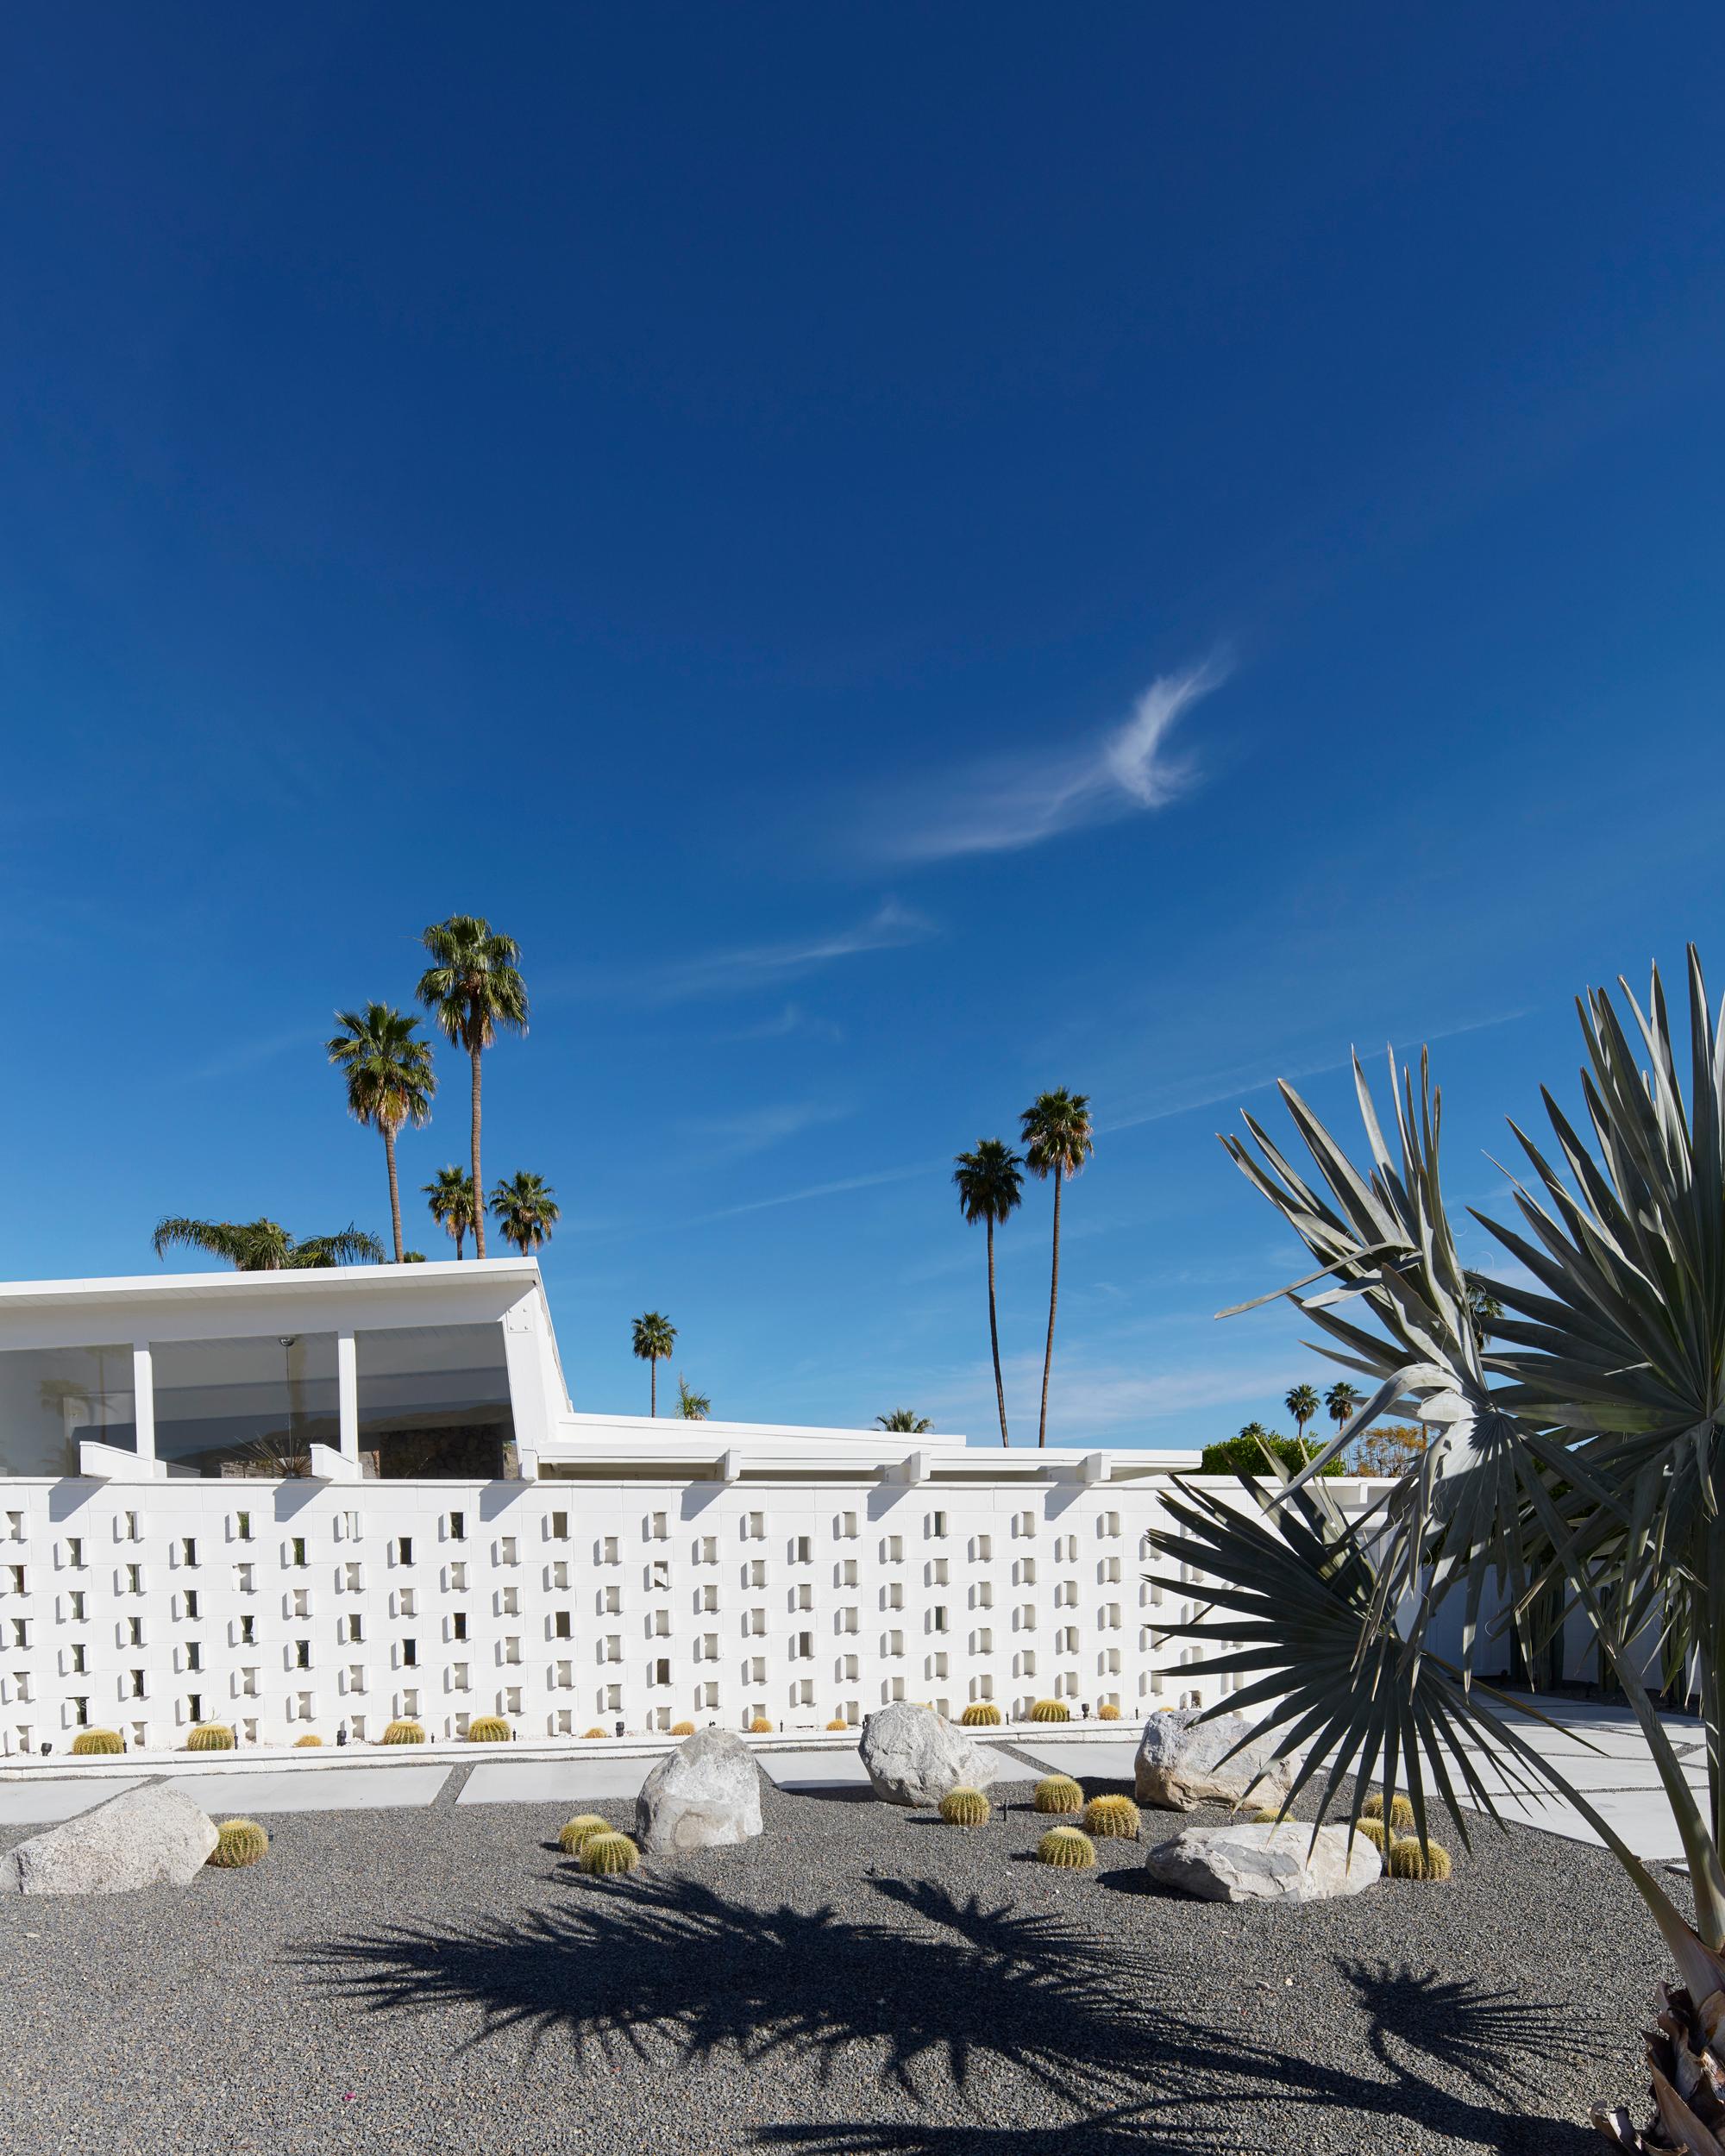 Frank Schott Color Photograph - Palm Springs ( White )  - a study of iconic mid century desert architecture